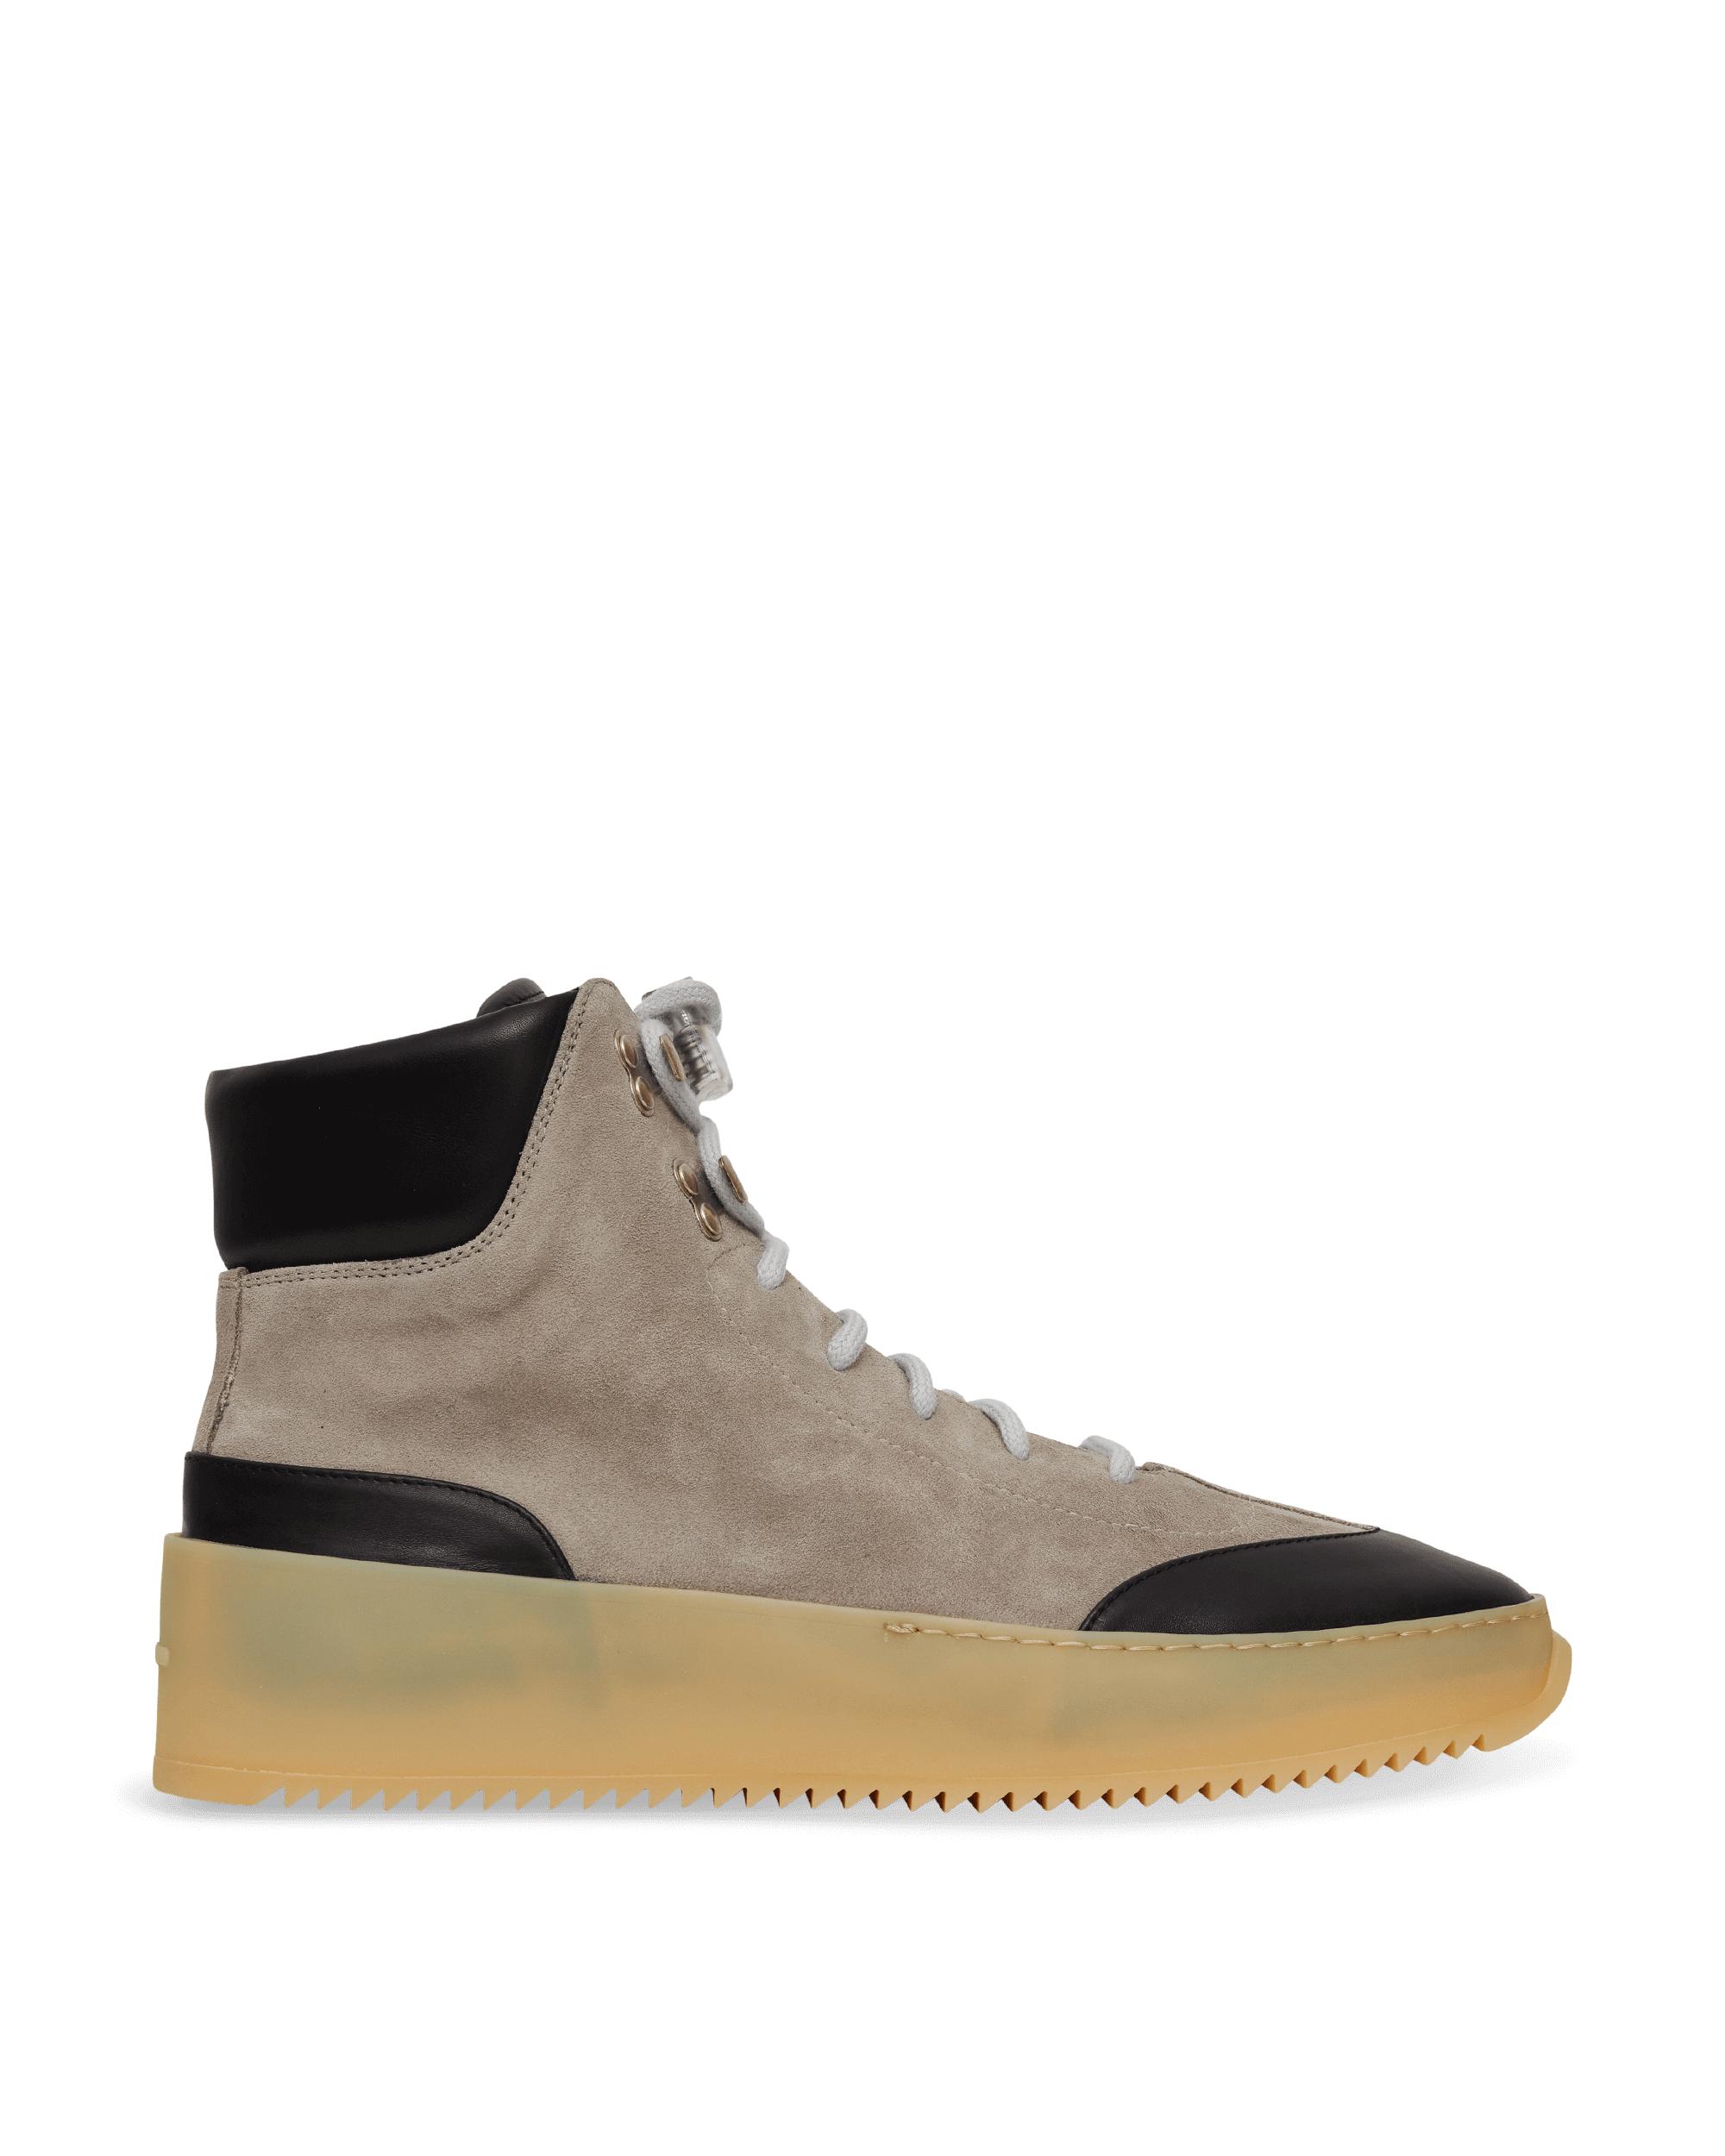 Fear Of God Suede 6th Collection Hiker Boots in Gray for Men - Lyst